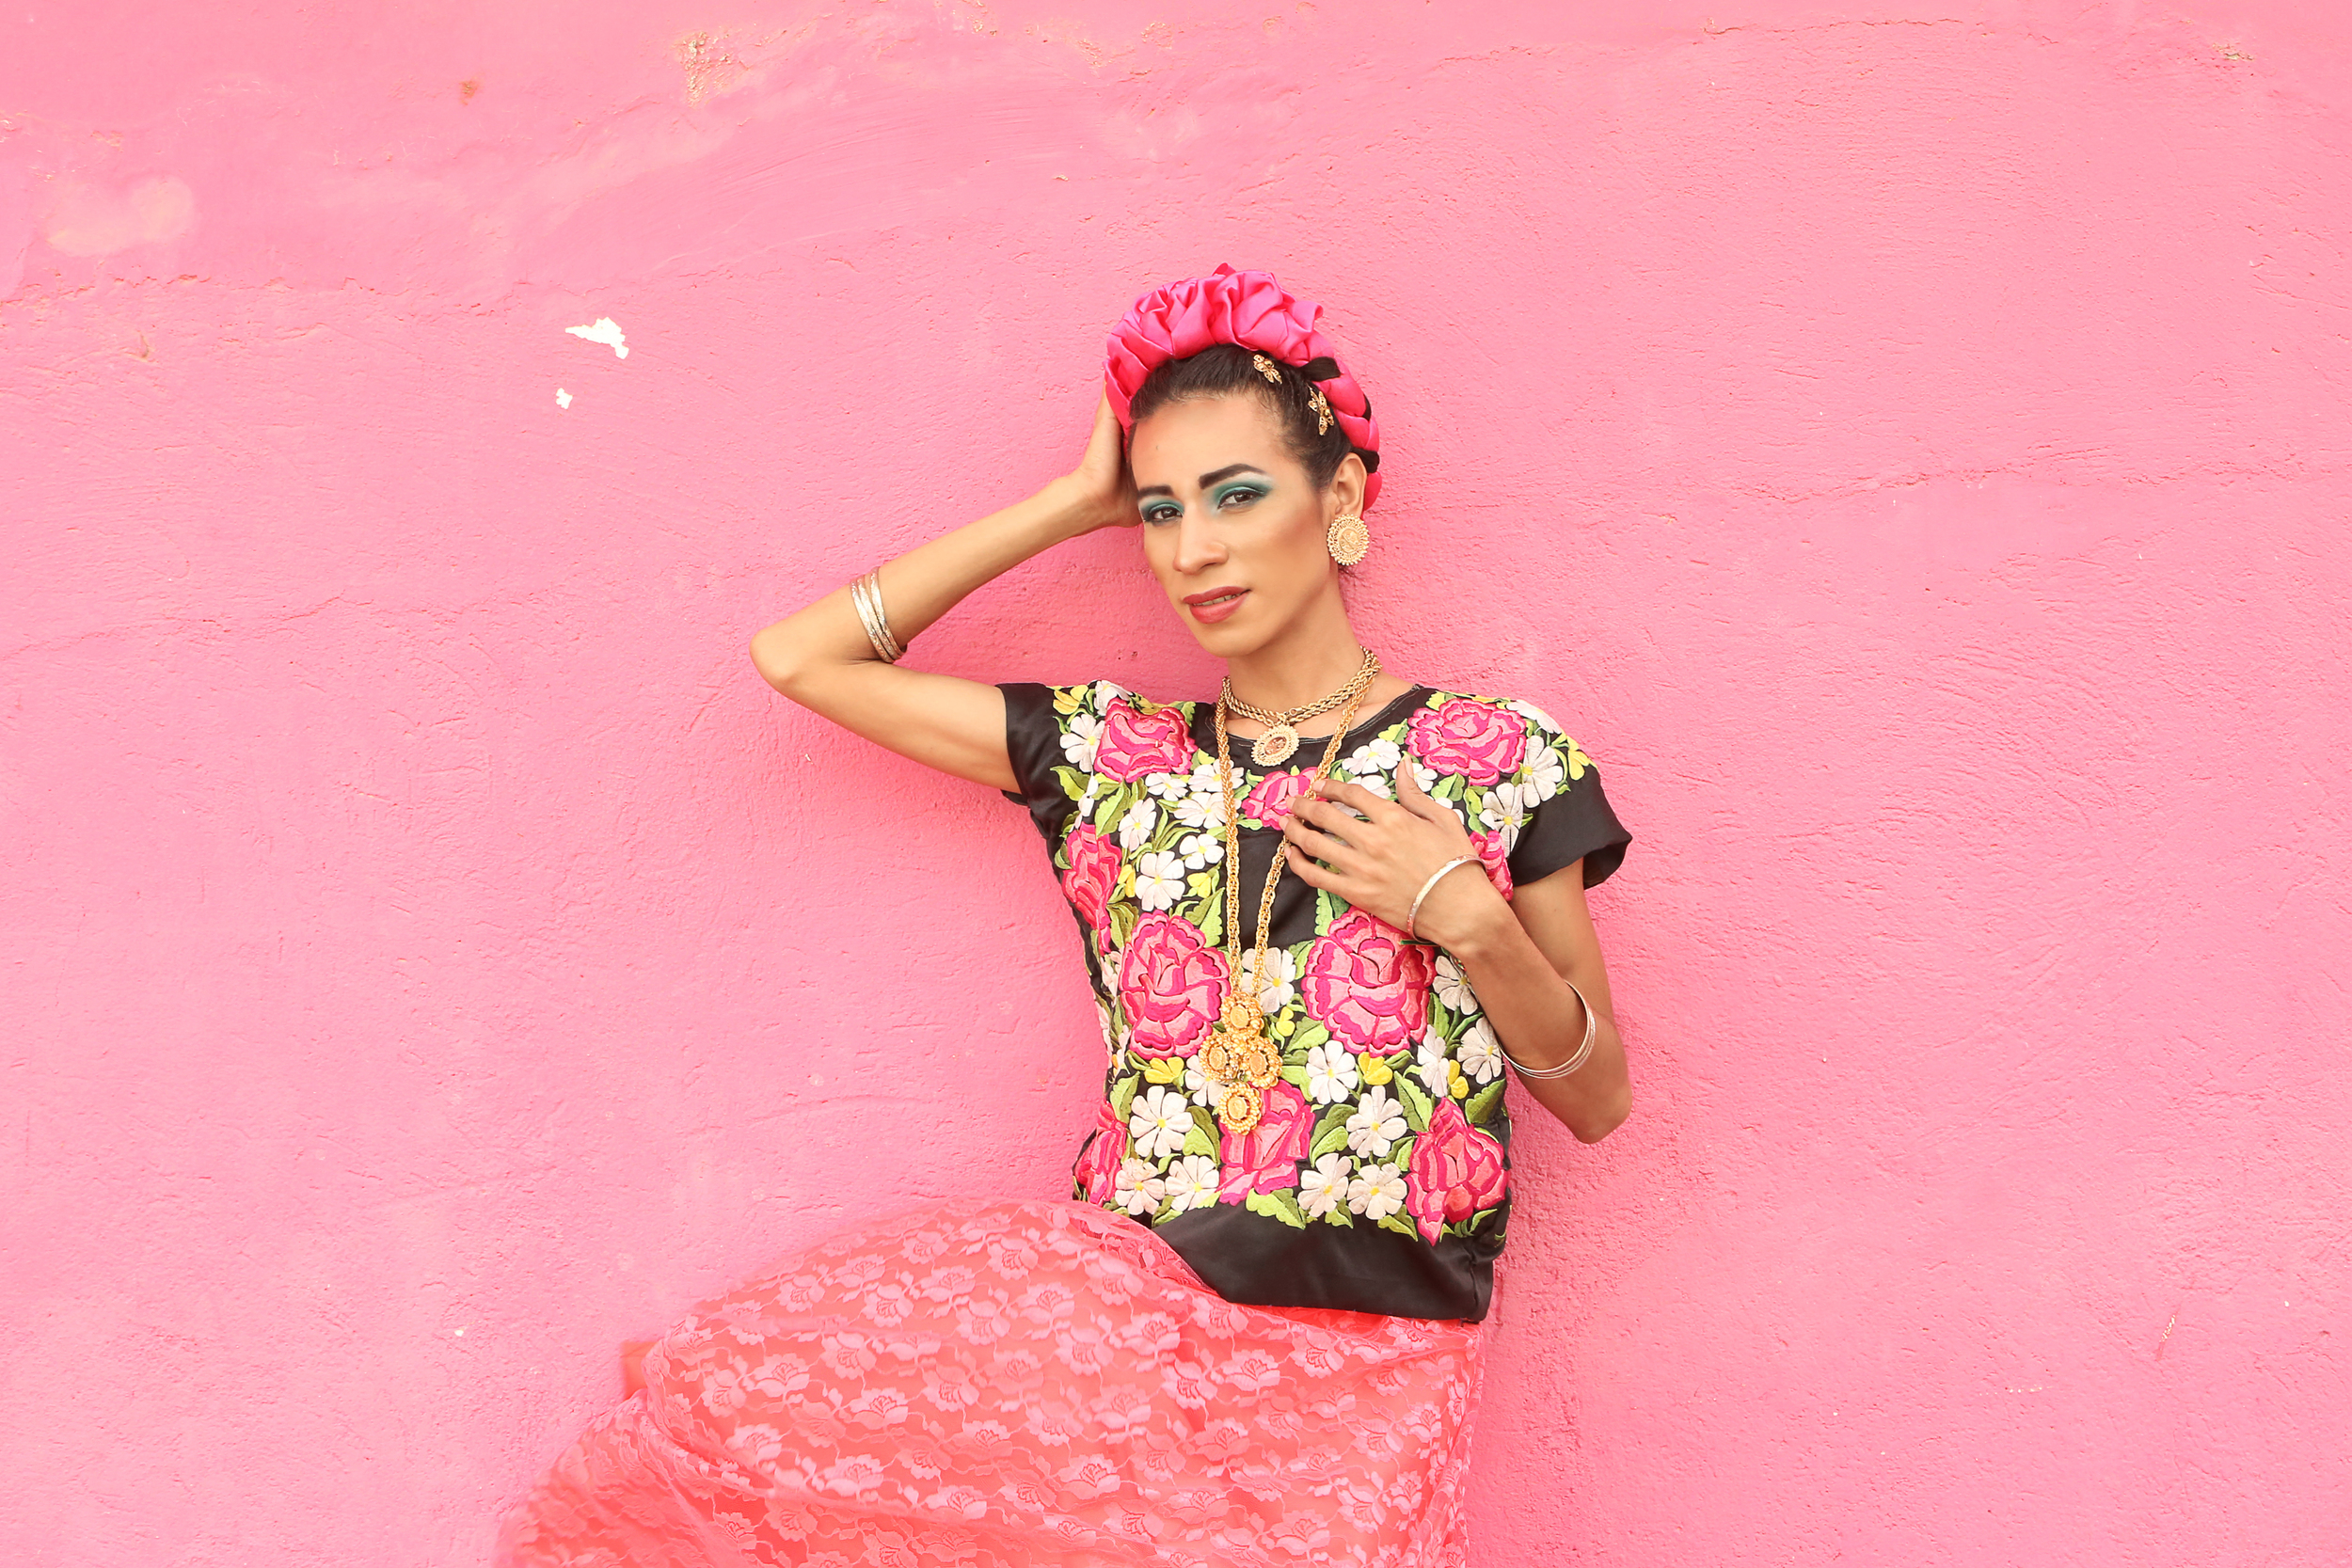  A photo documentary series of Mexico's transgendered Zapotecs  Involvement: Art direction,&nbsp;photography, post production 